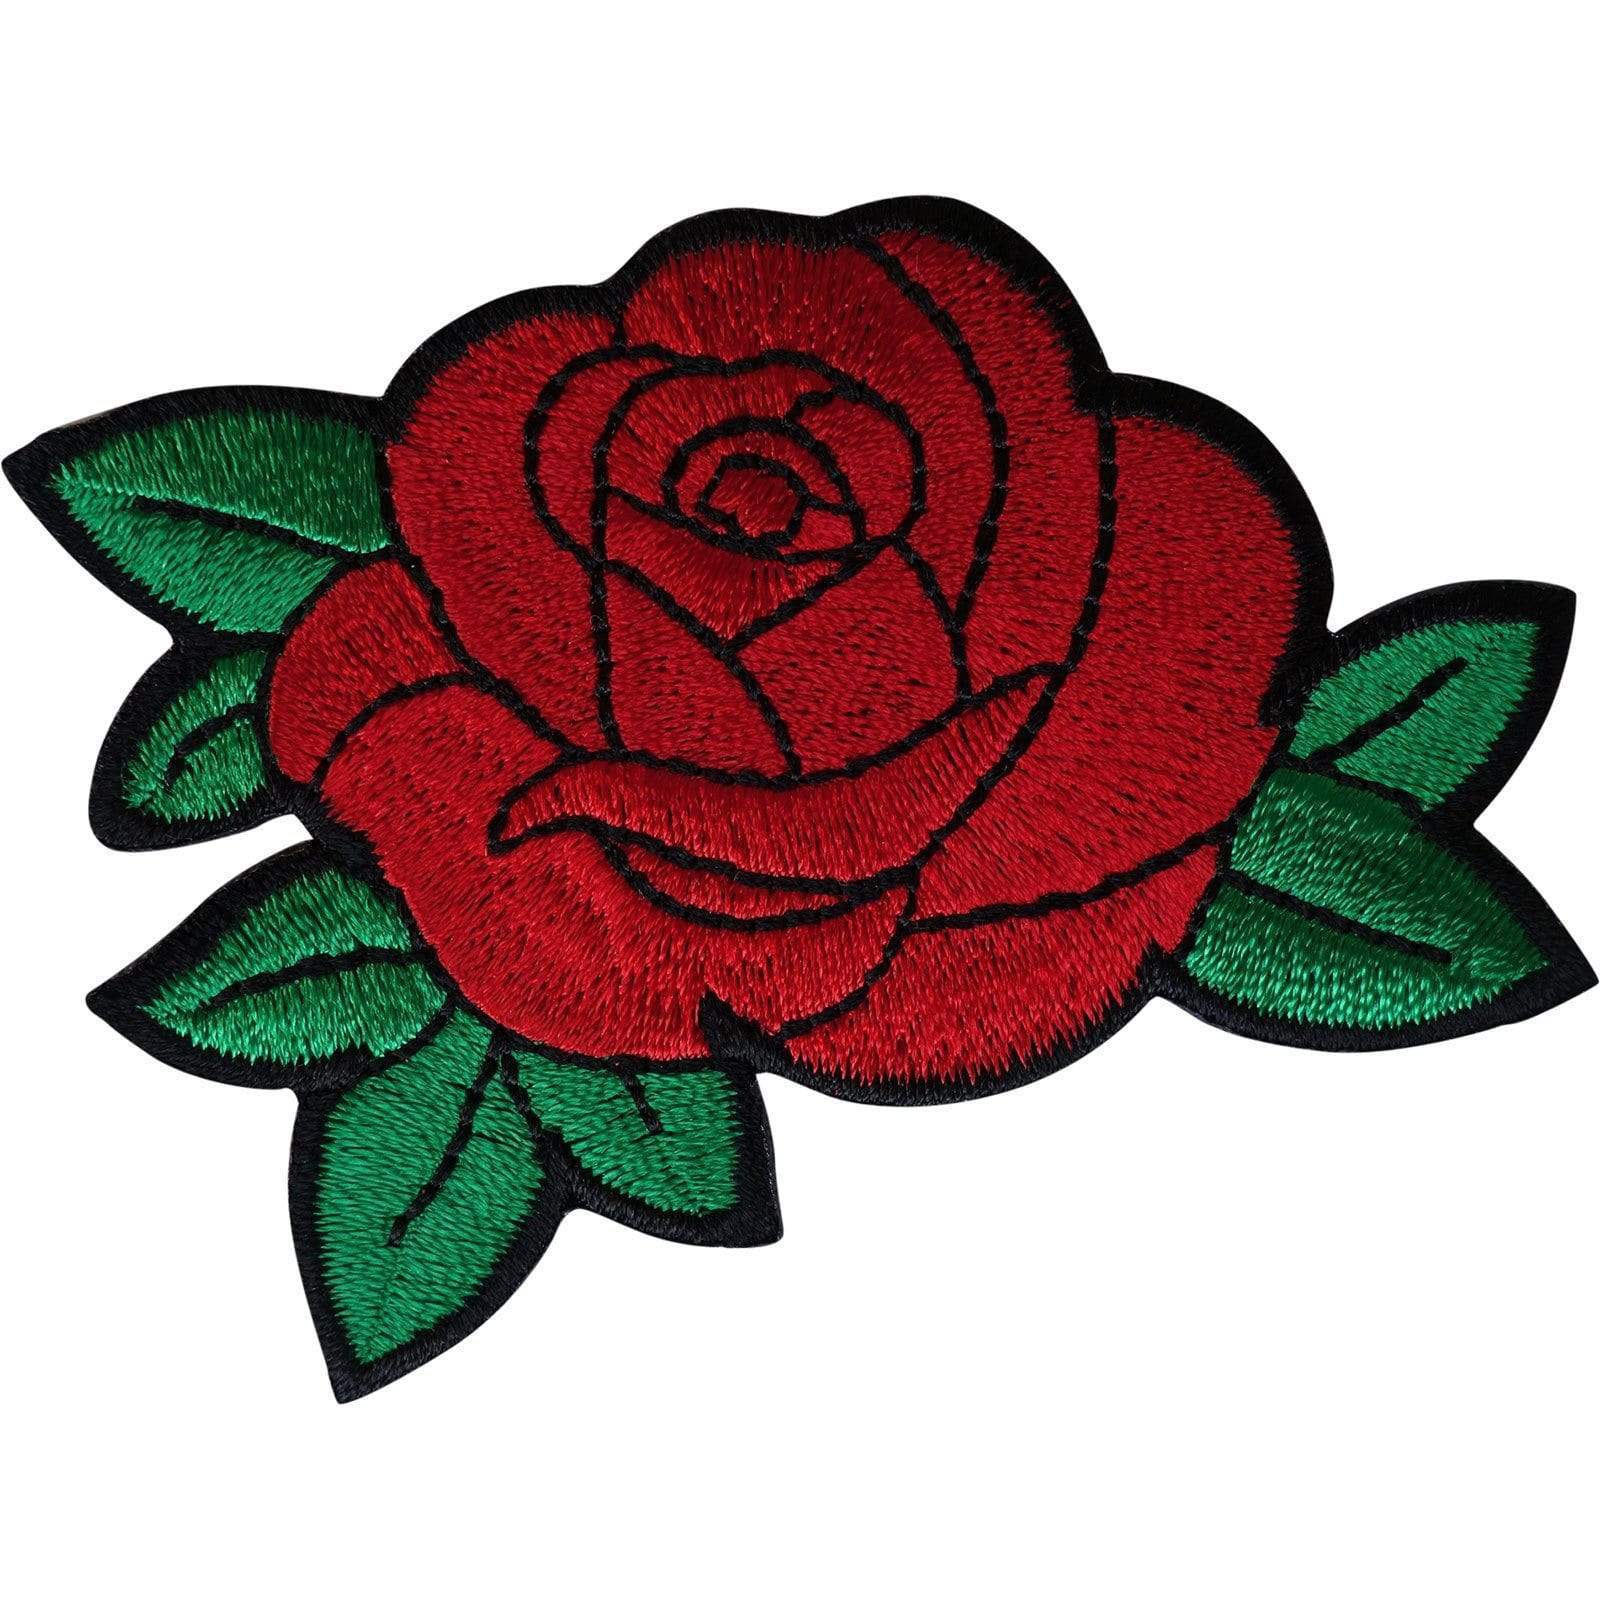 Red Rose Flower Patch Iron Sew On Embroidered Badge Clothes Embroidery Applique